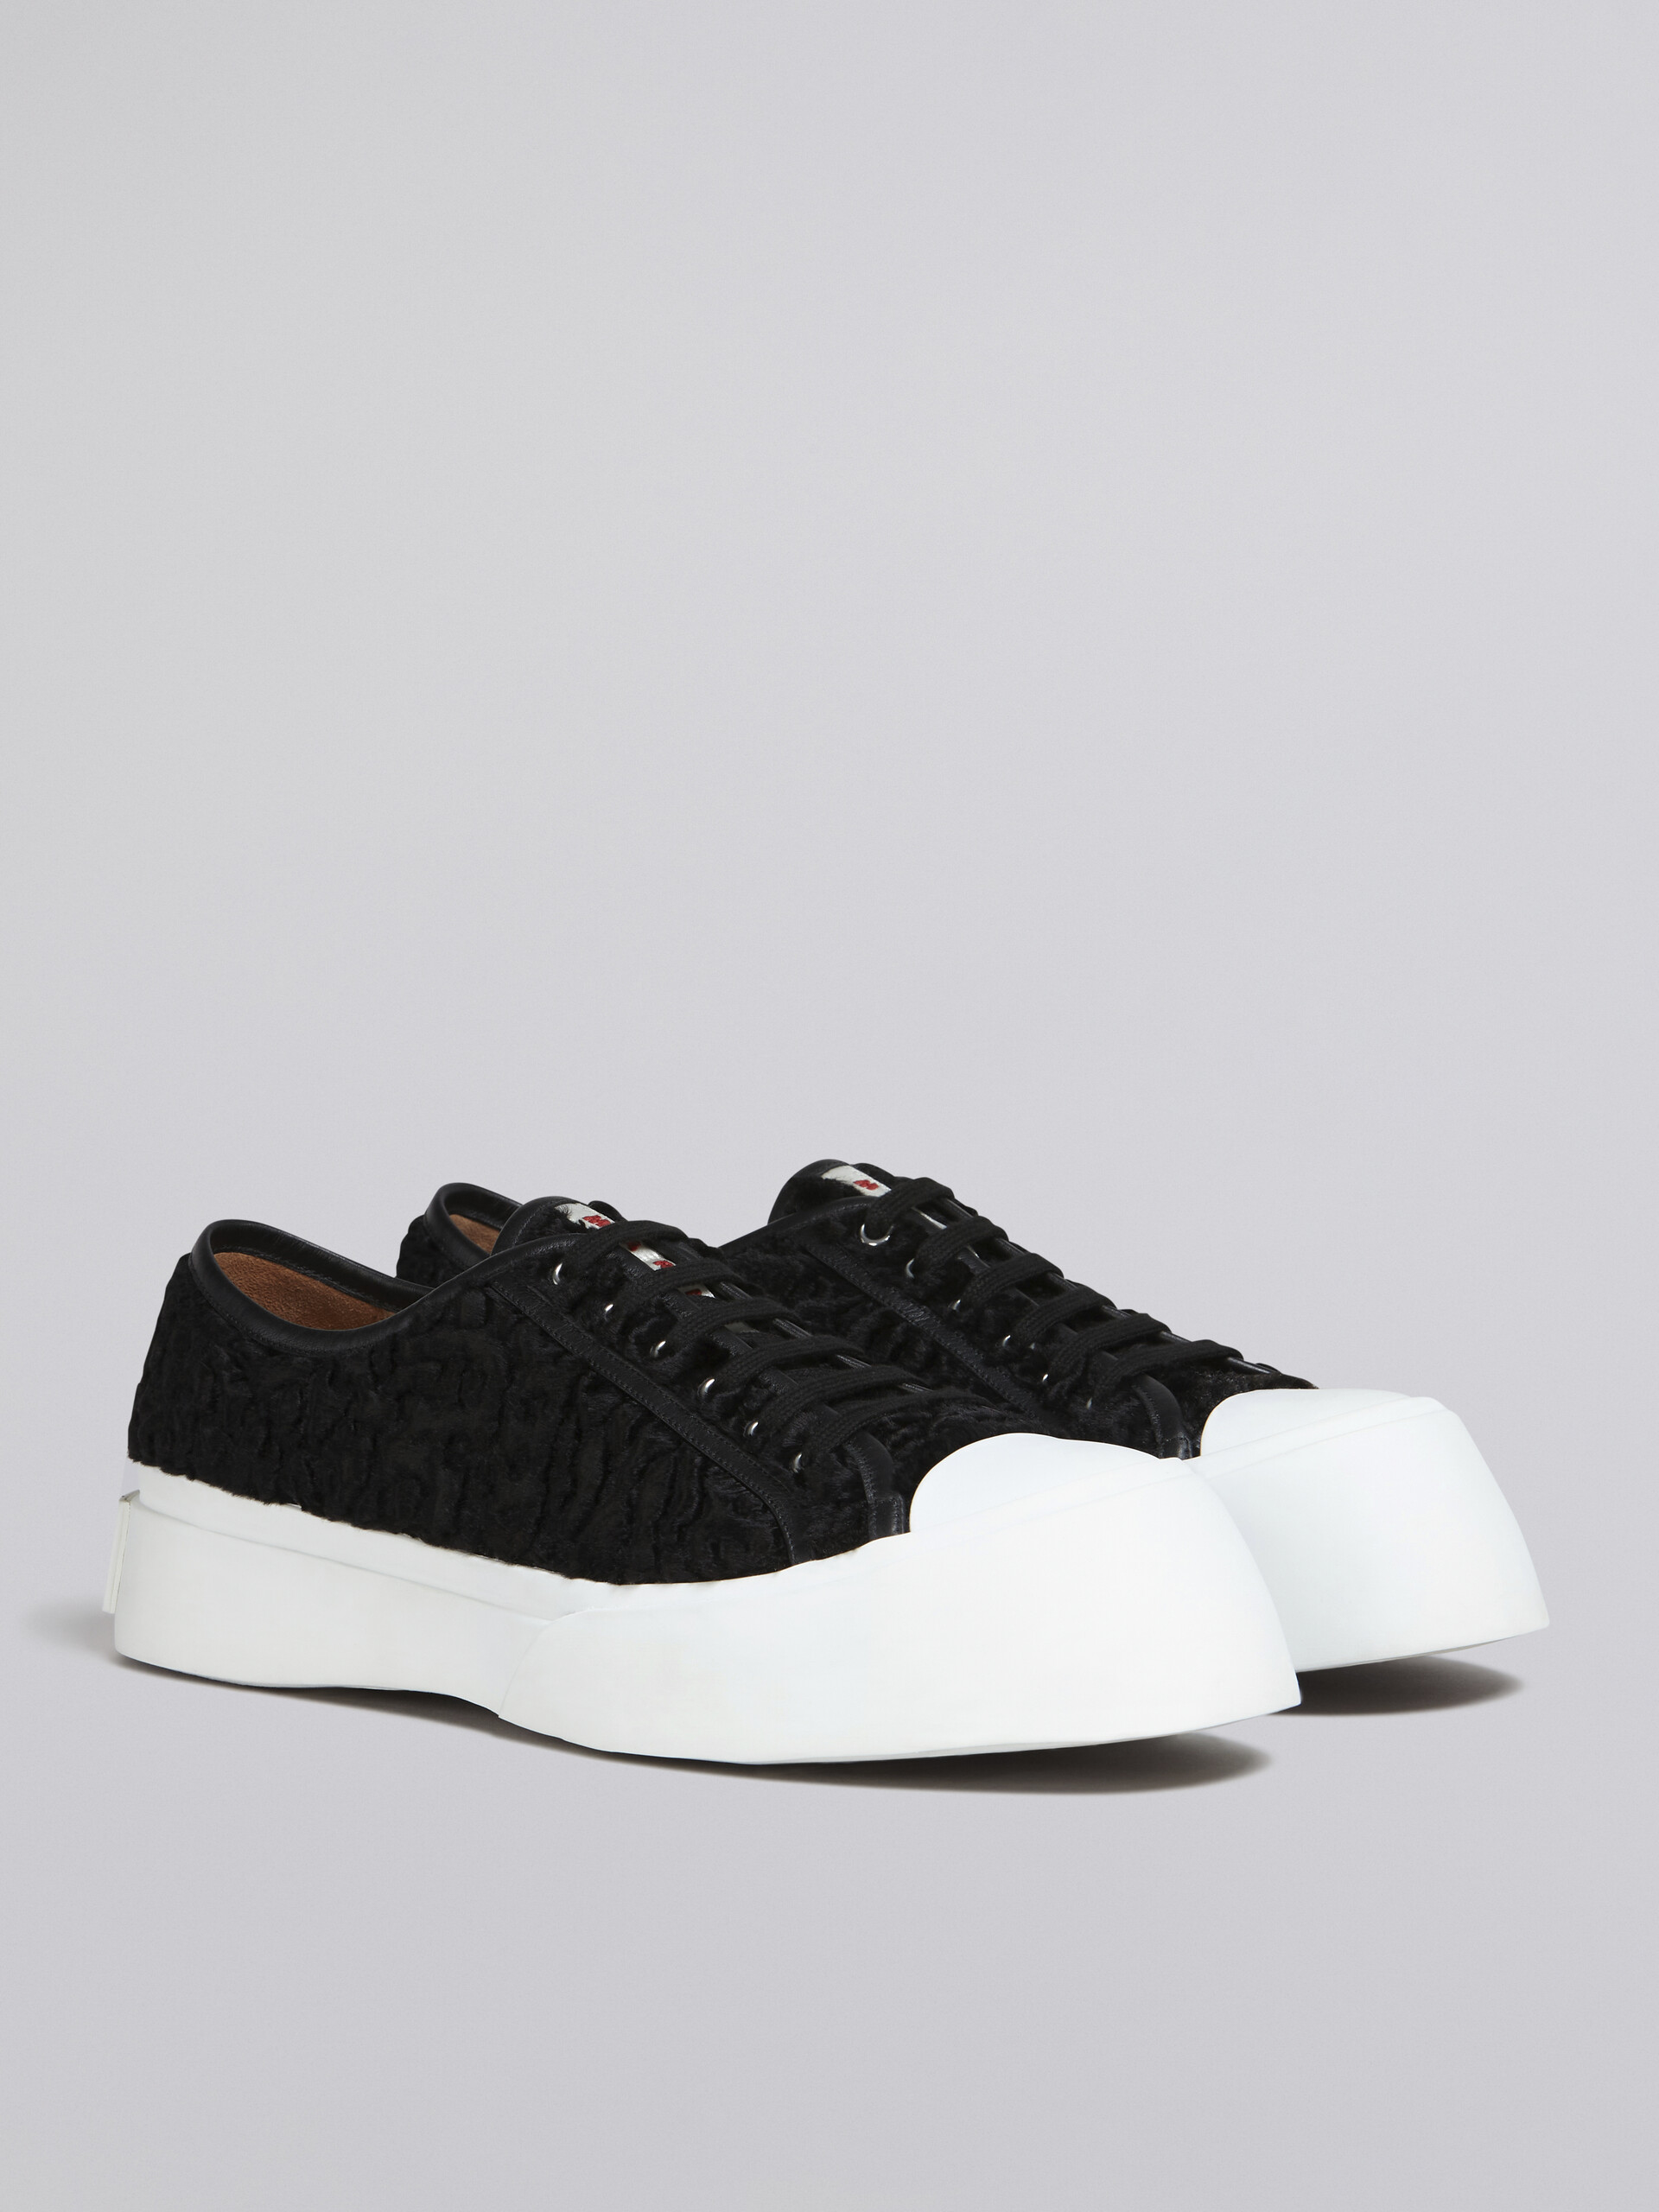 Black soft calf leather PABLO sneaker - Sneakers - Image 2